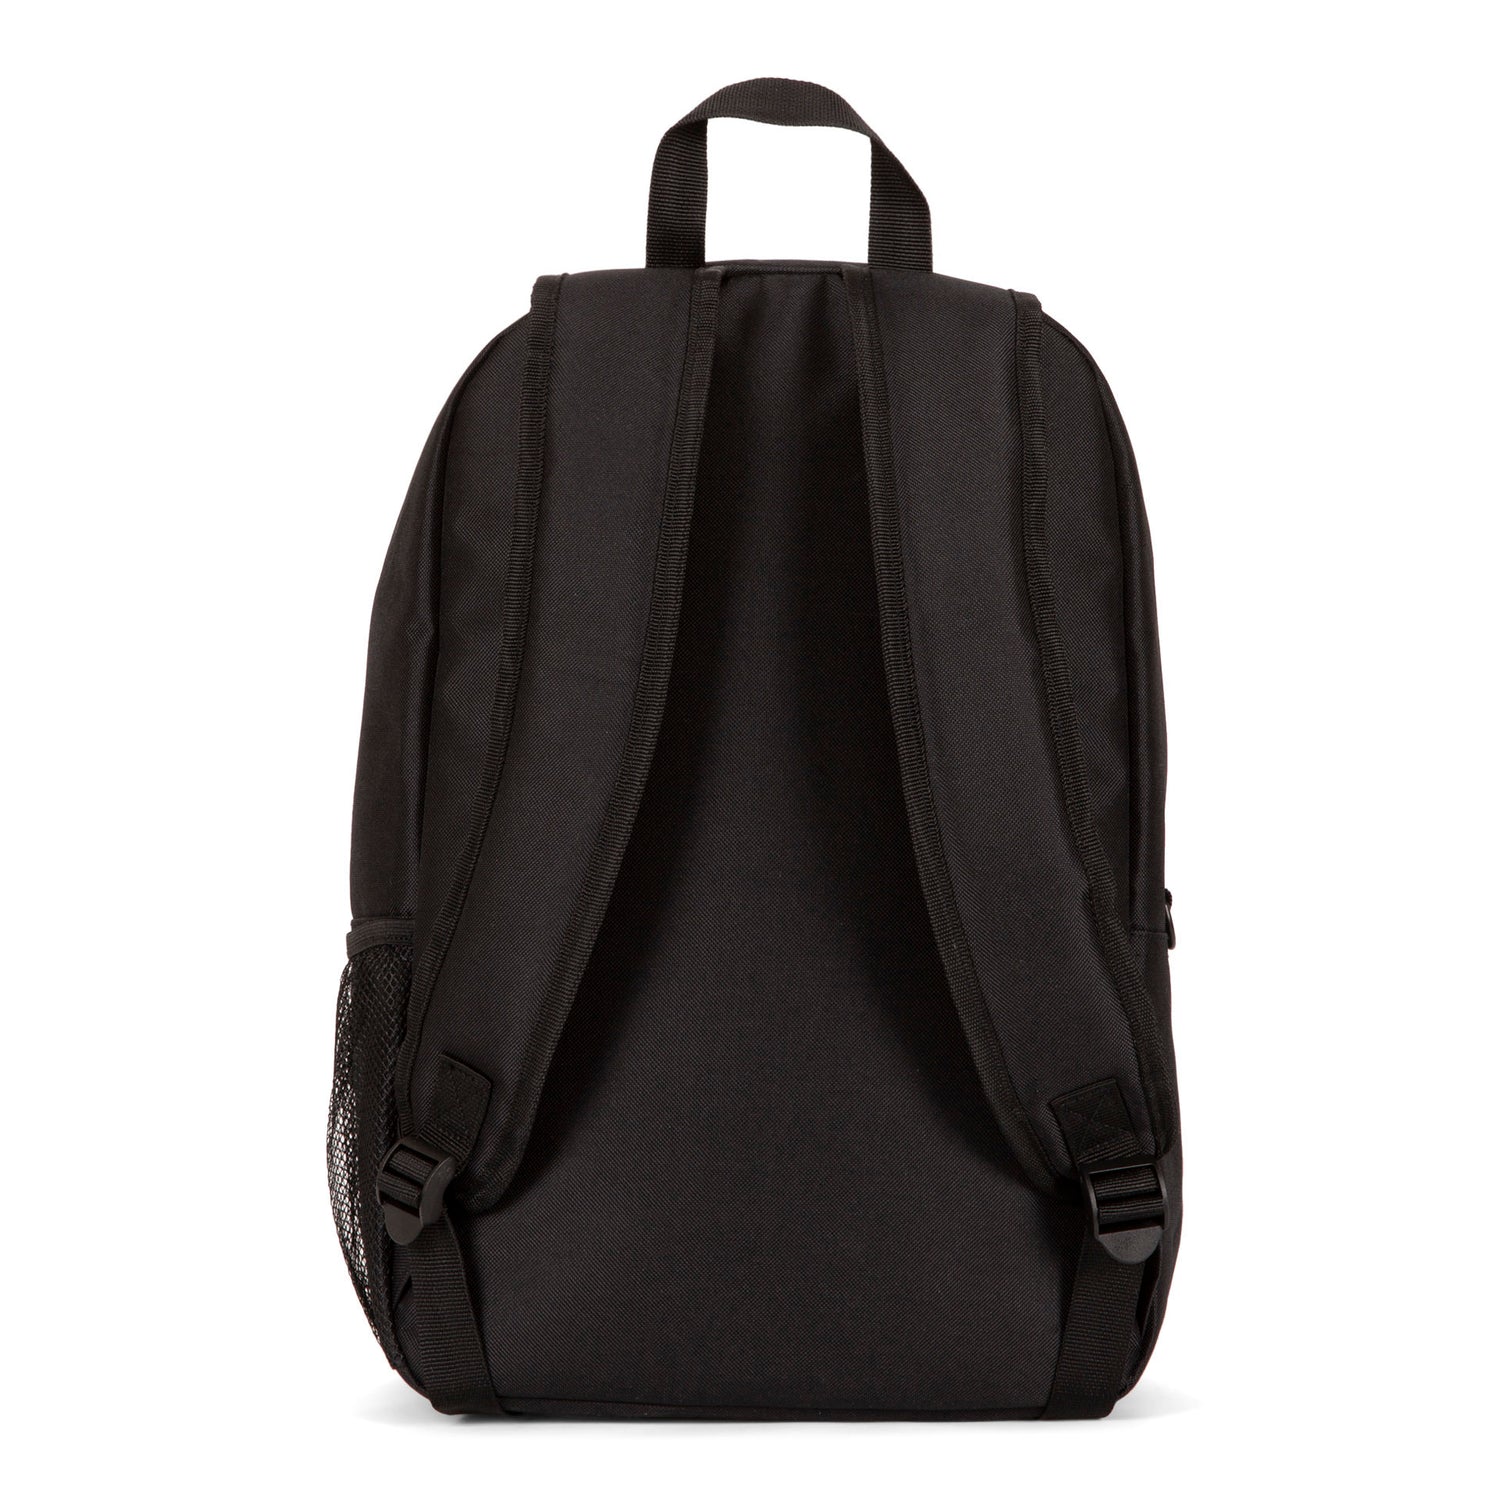 Back side of the black Tracker's Mega Value backpack on a white background, showcasing its straps and top handle.